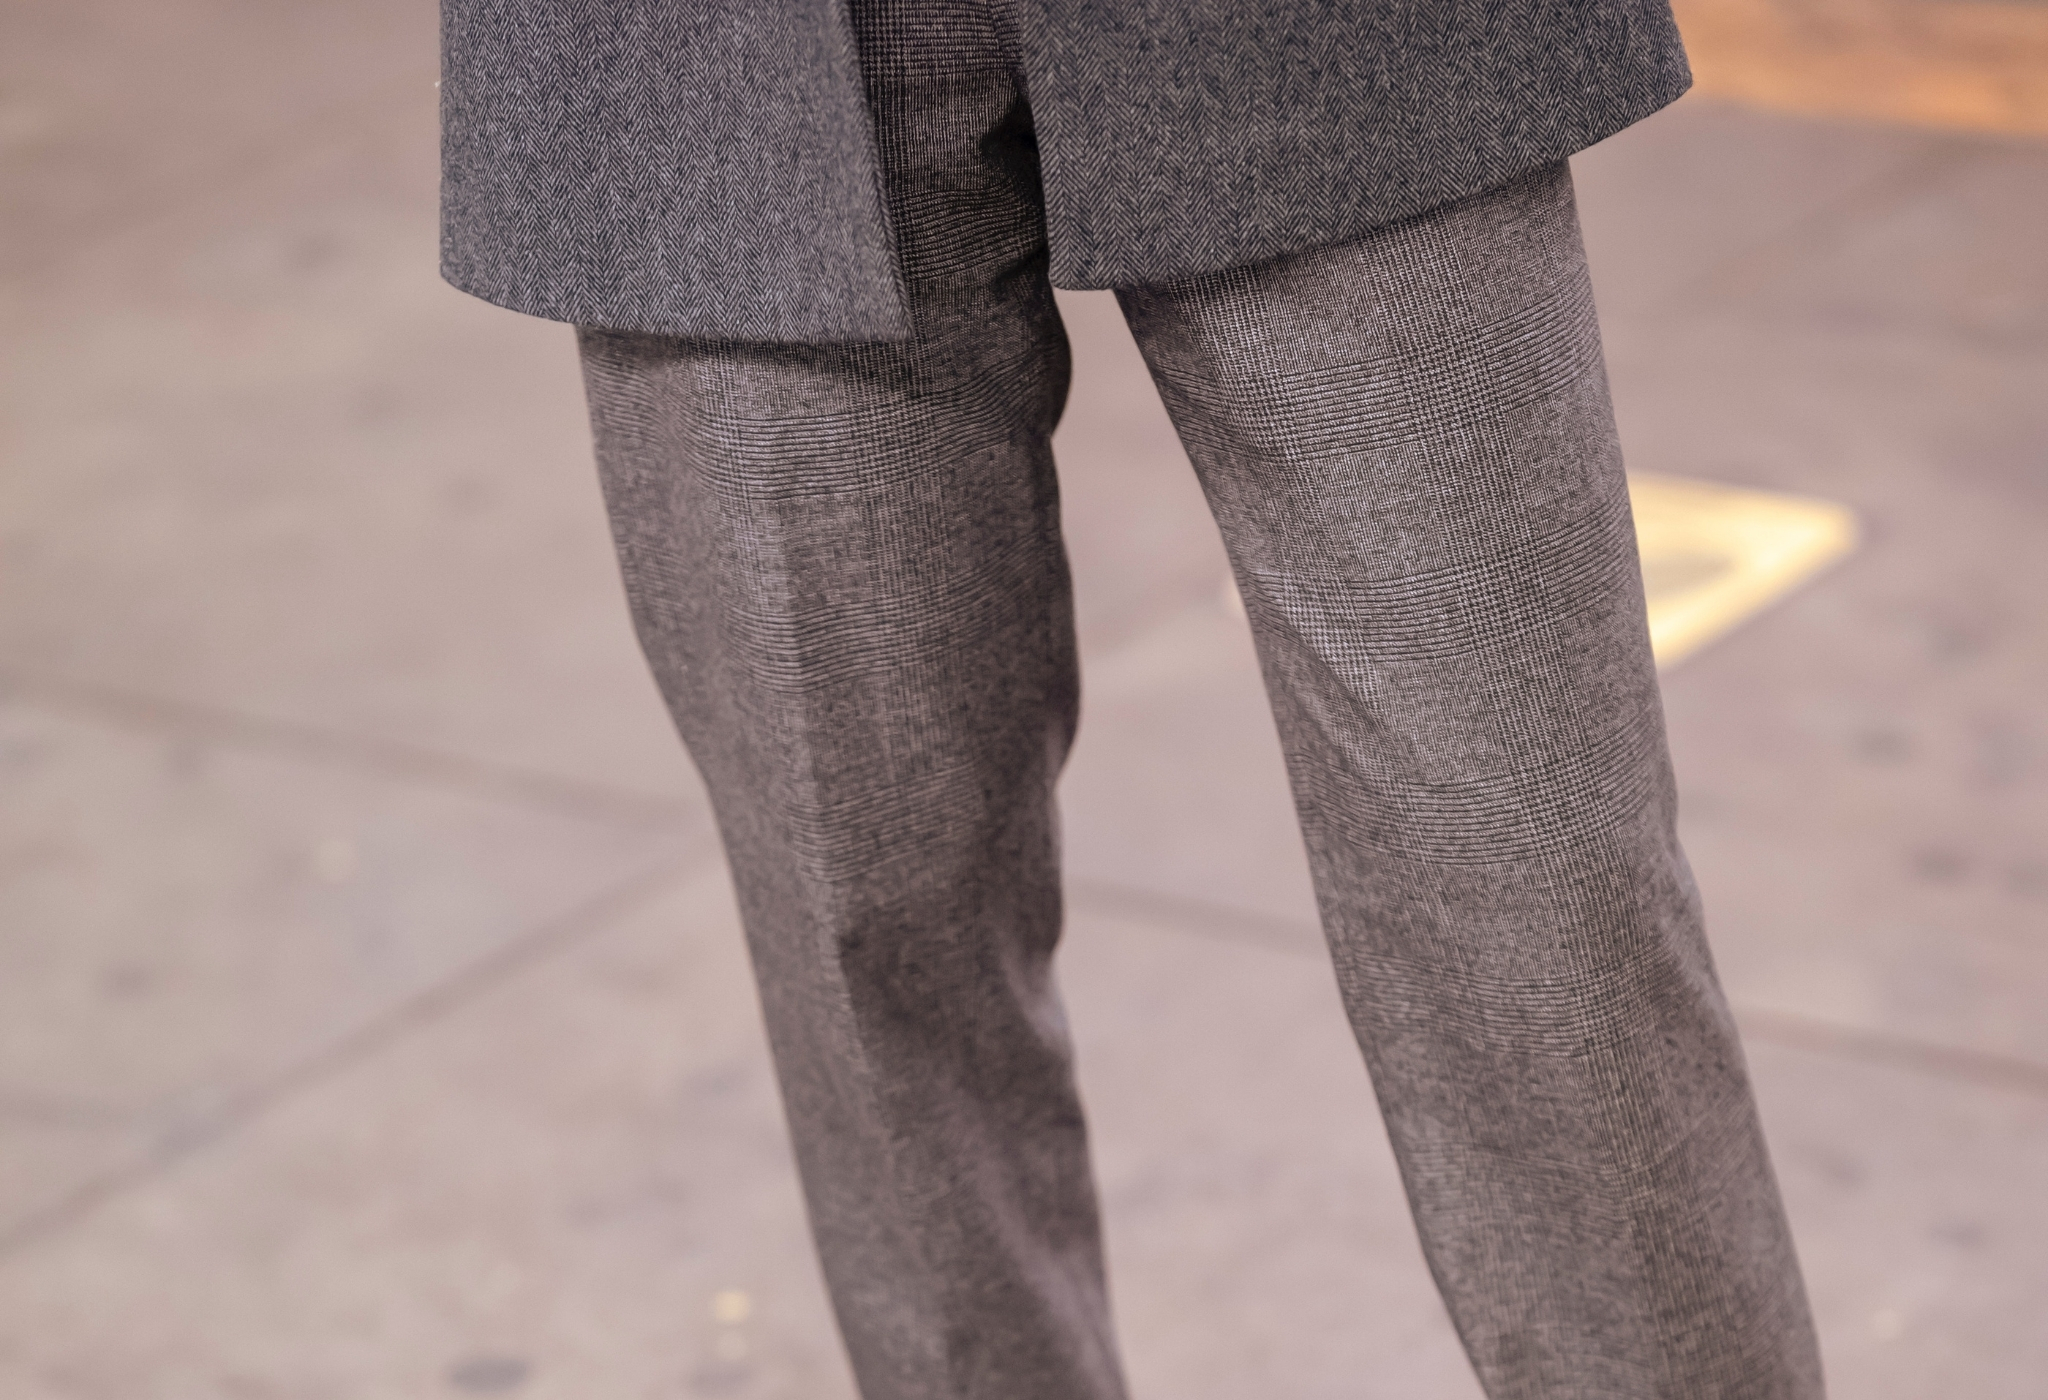 flannel trousers as part of men's fall outfits